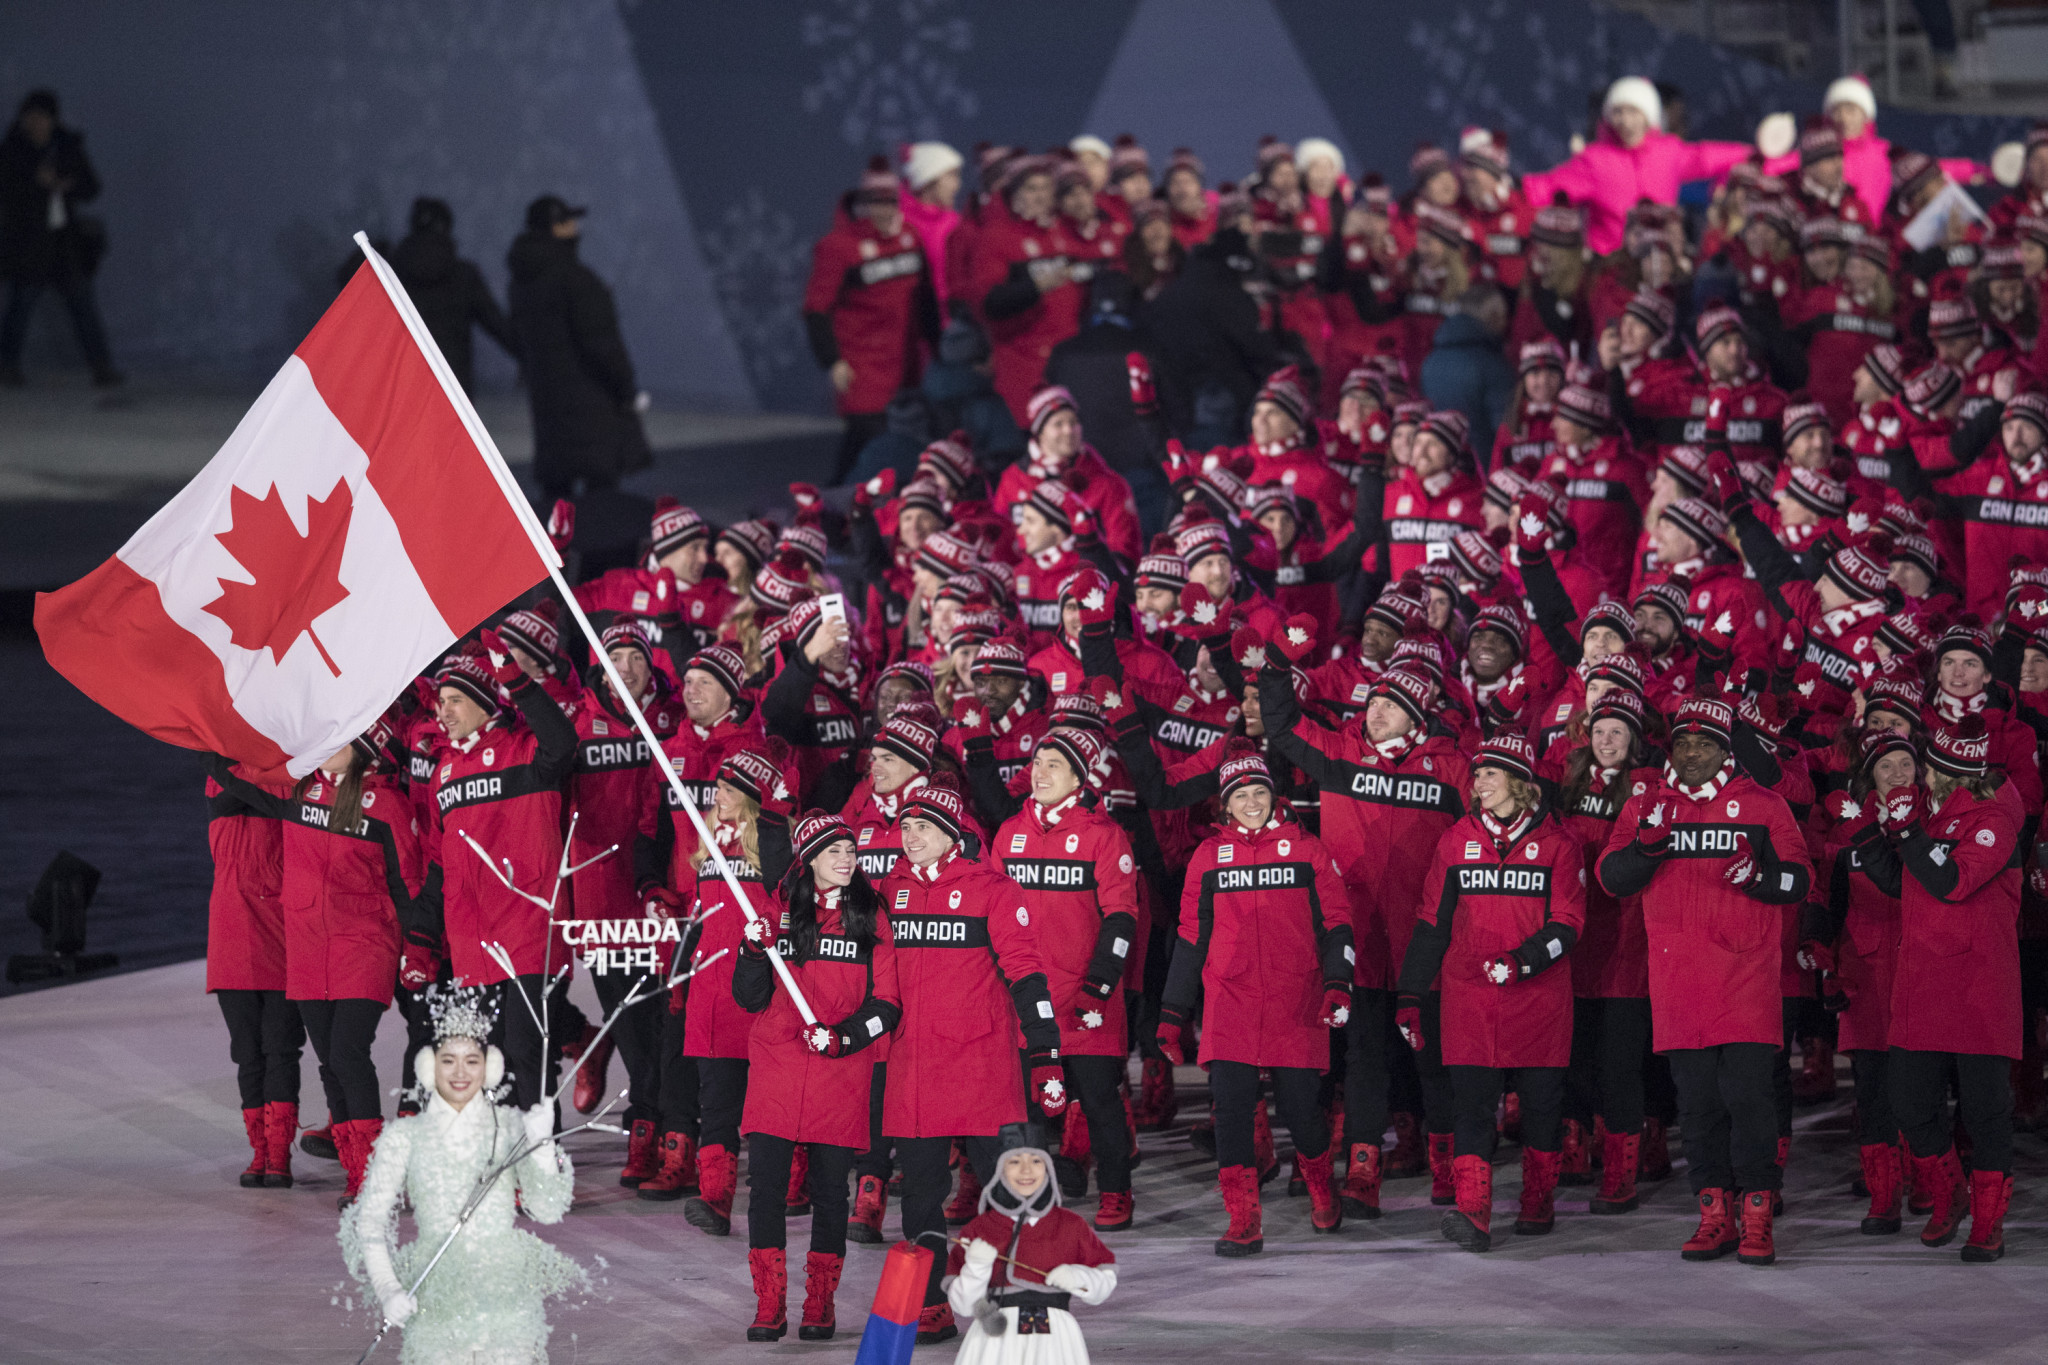 Canada has finished in the top three of the medal table at each of the last three editions of the Winter Olympics and Paralympics ©Getty Images